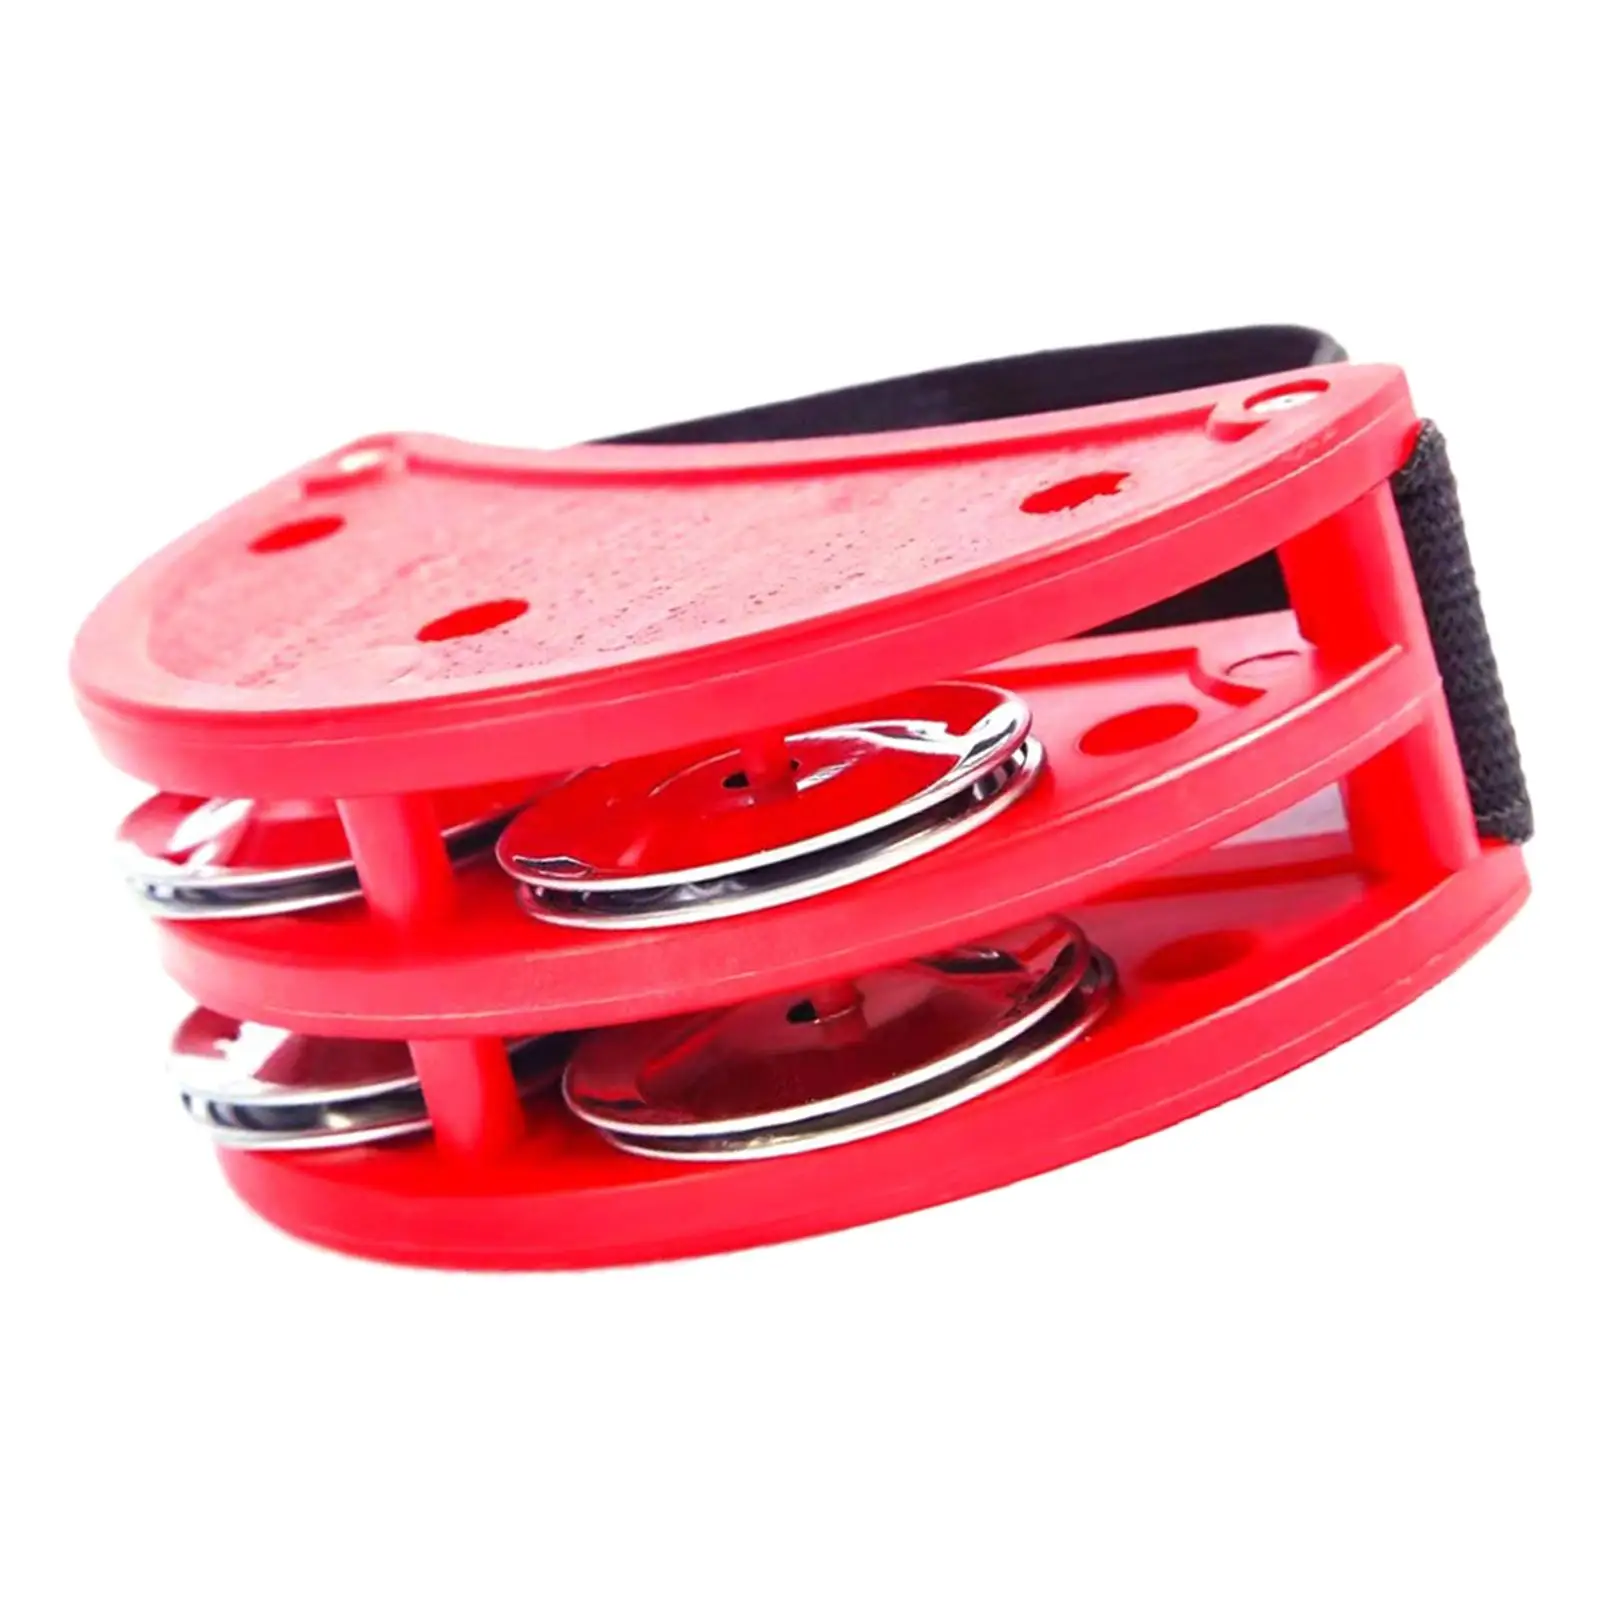 Foot Tambourine Guitar Drum Accessory Instrument for Adults and Kids KTV